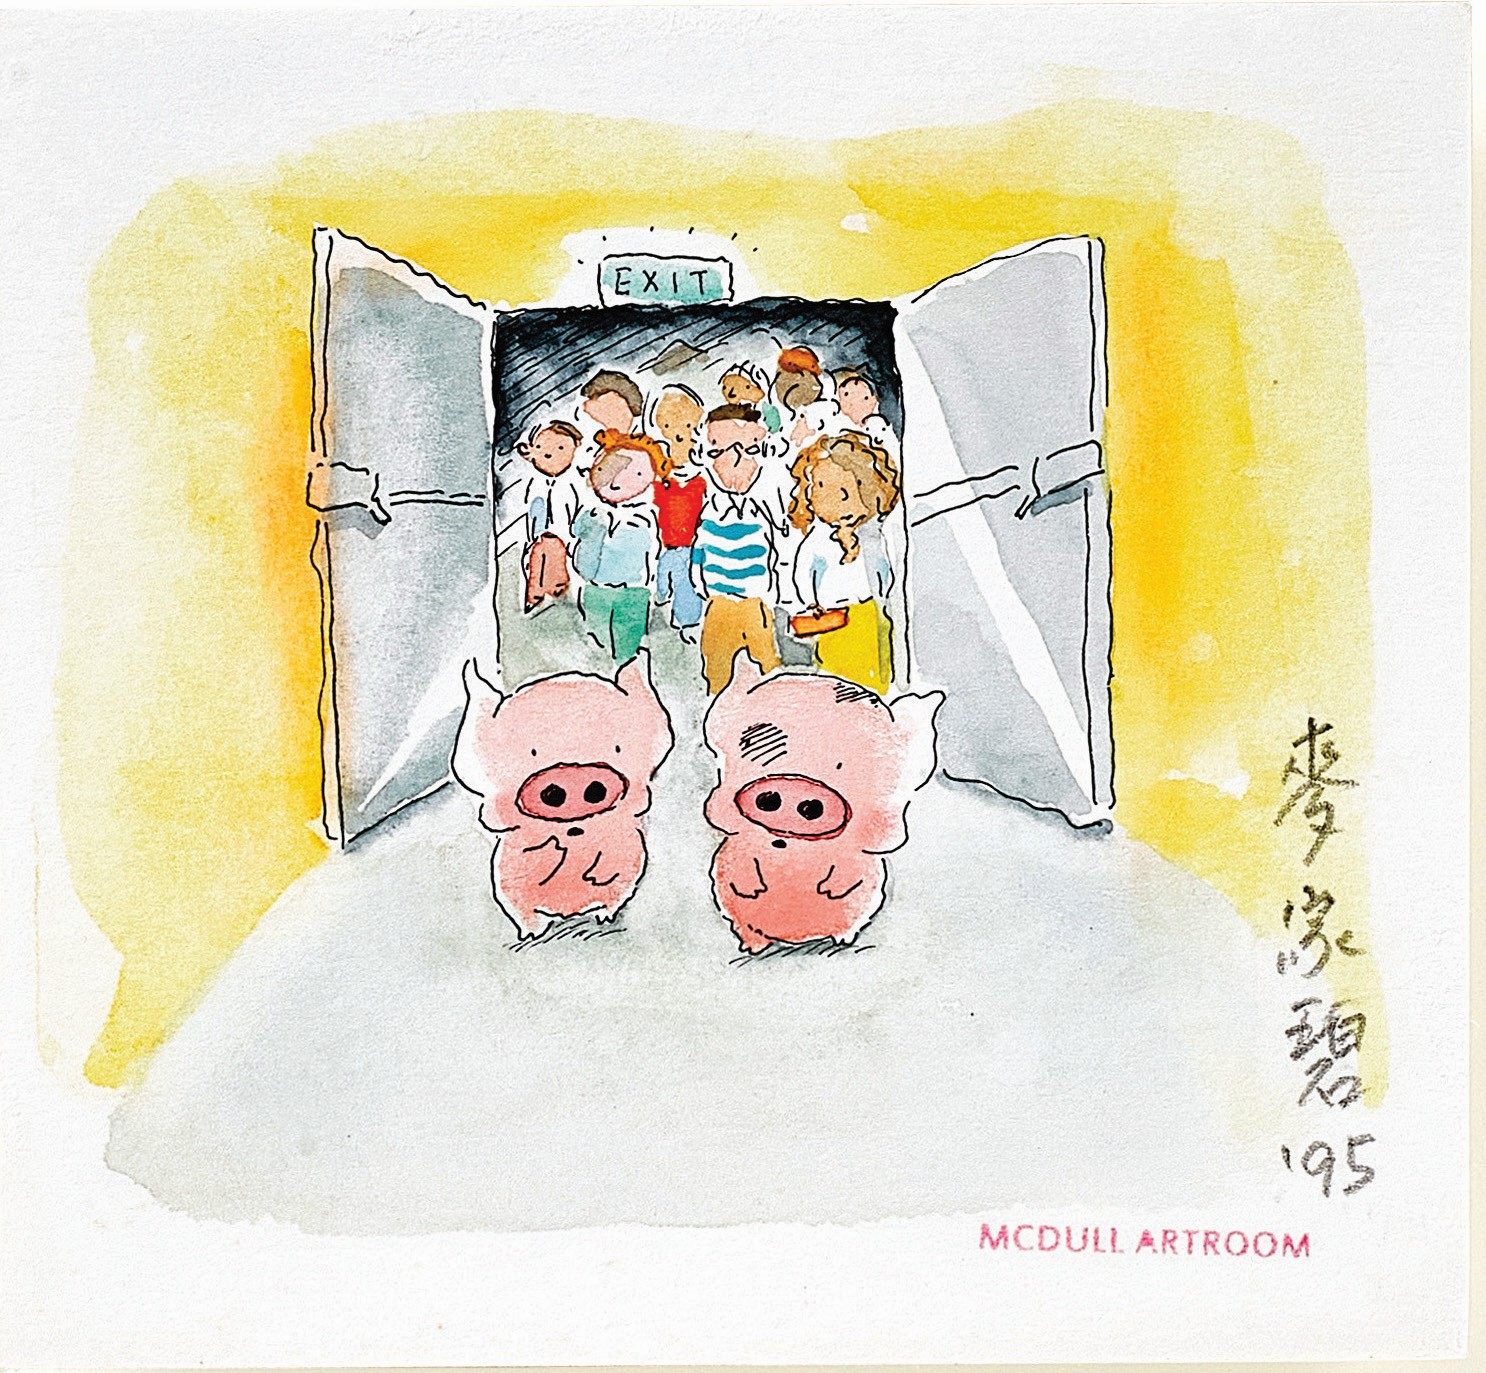 Ashes of Time (1995), a painting featuring the cartoon characters McMug and McDull, by creator Alice Mak, part of a collection of items including NFTs that will be auctioned by Sotheby’s in January. Photo: Sotheby’s